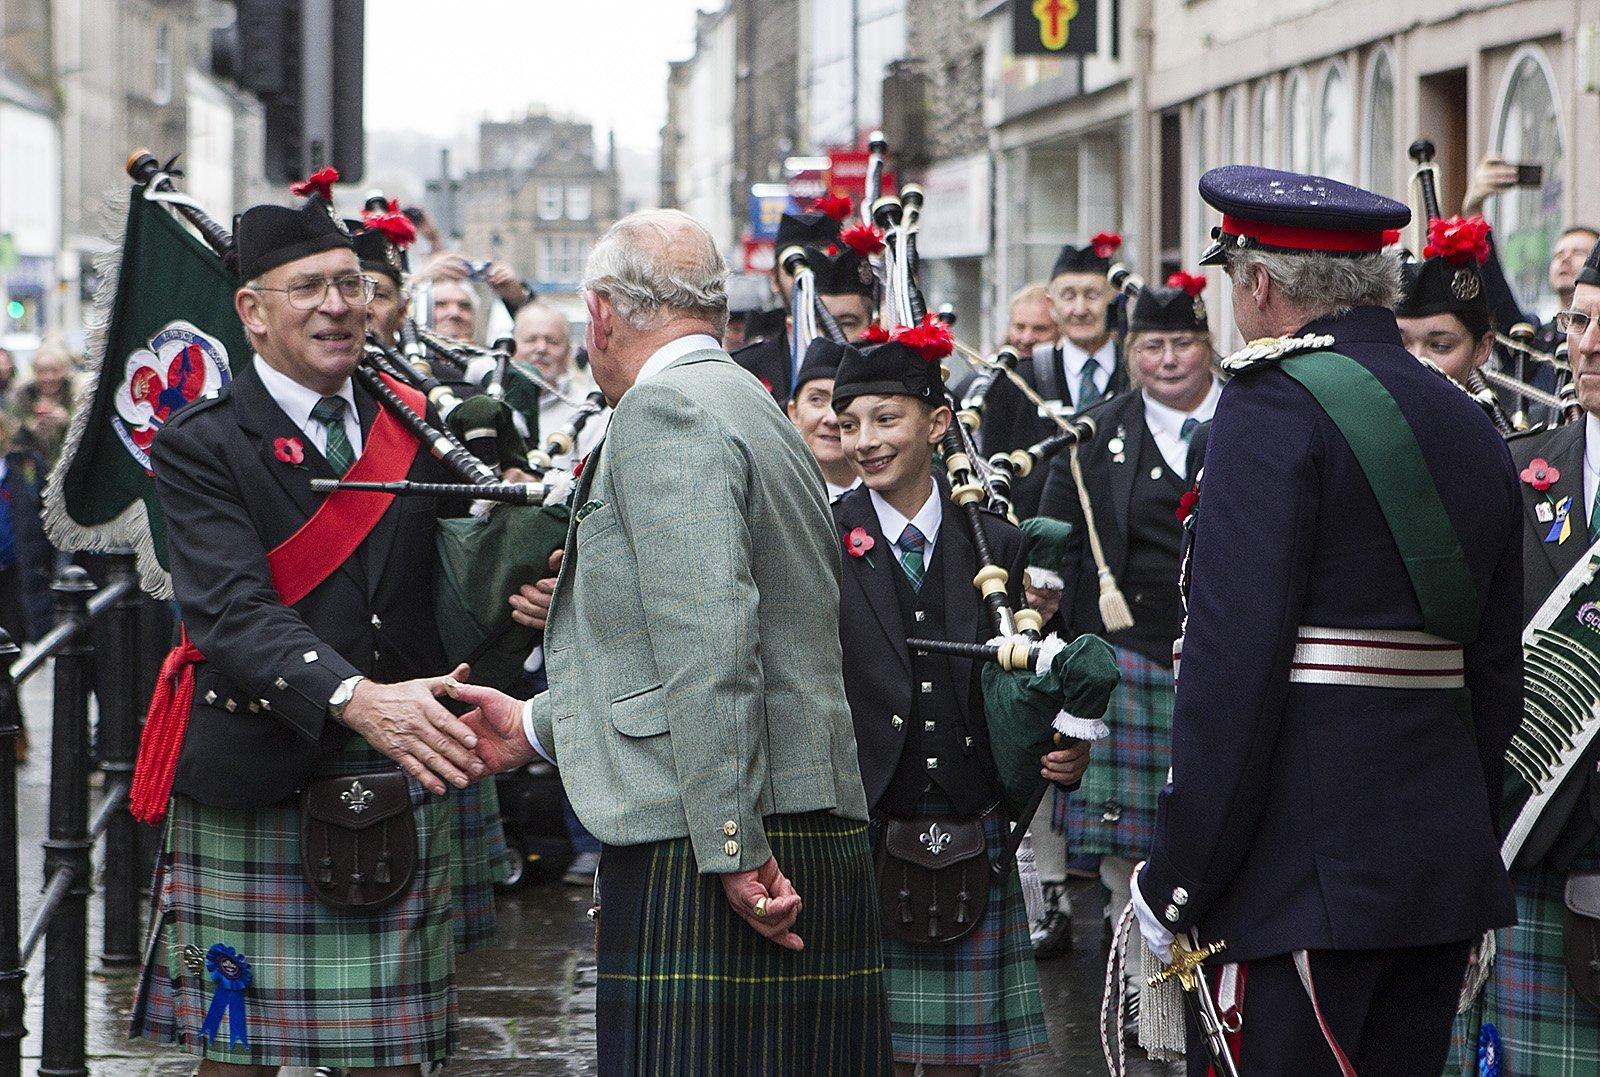 Hawick Scouts Pipe Band pipe major Michael Bruce meets the Duke of Rothesay.